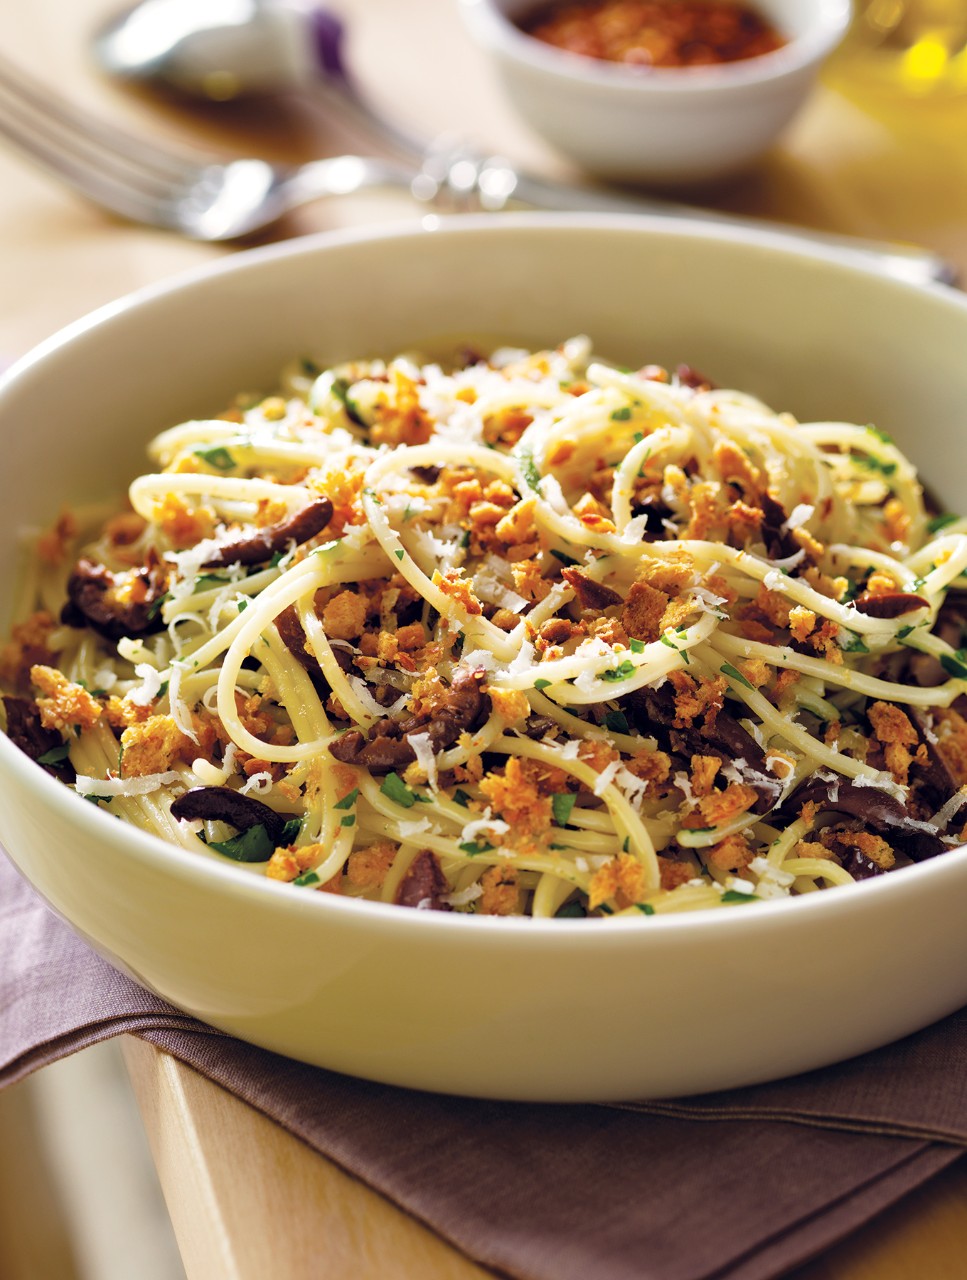 Capellini with Olives & Crispy Crumbs